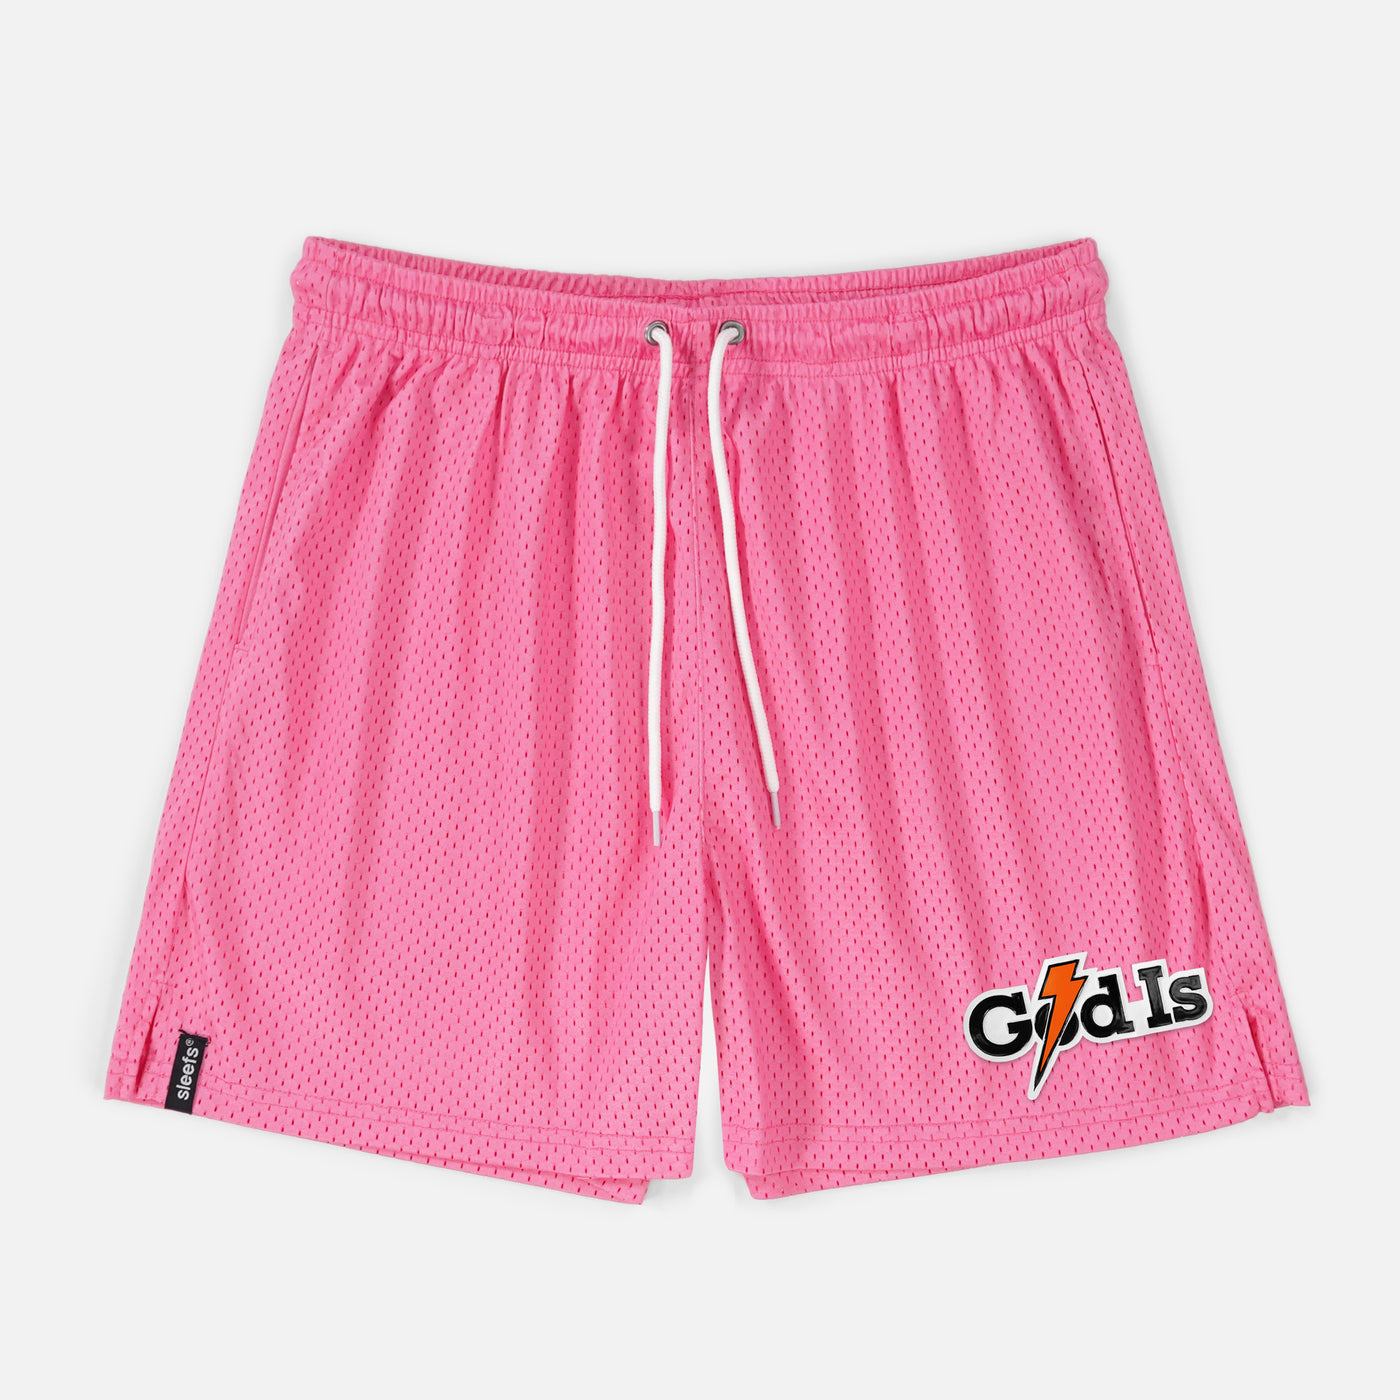 God Is Patch Shorts - 7"